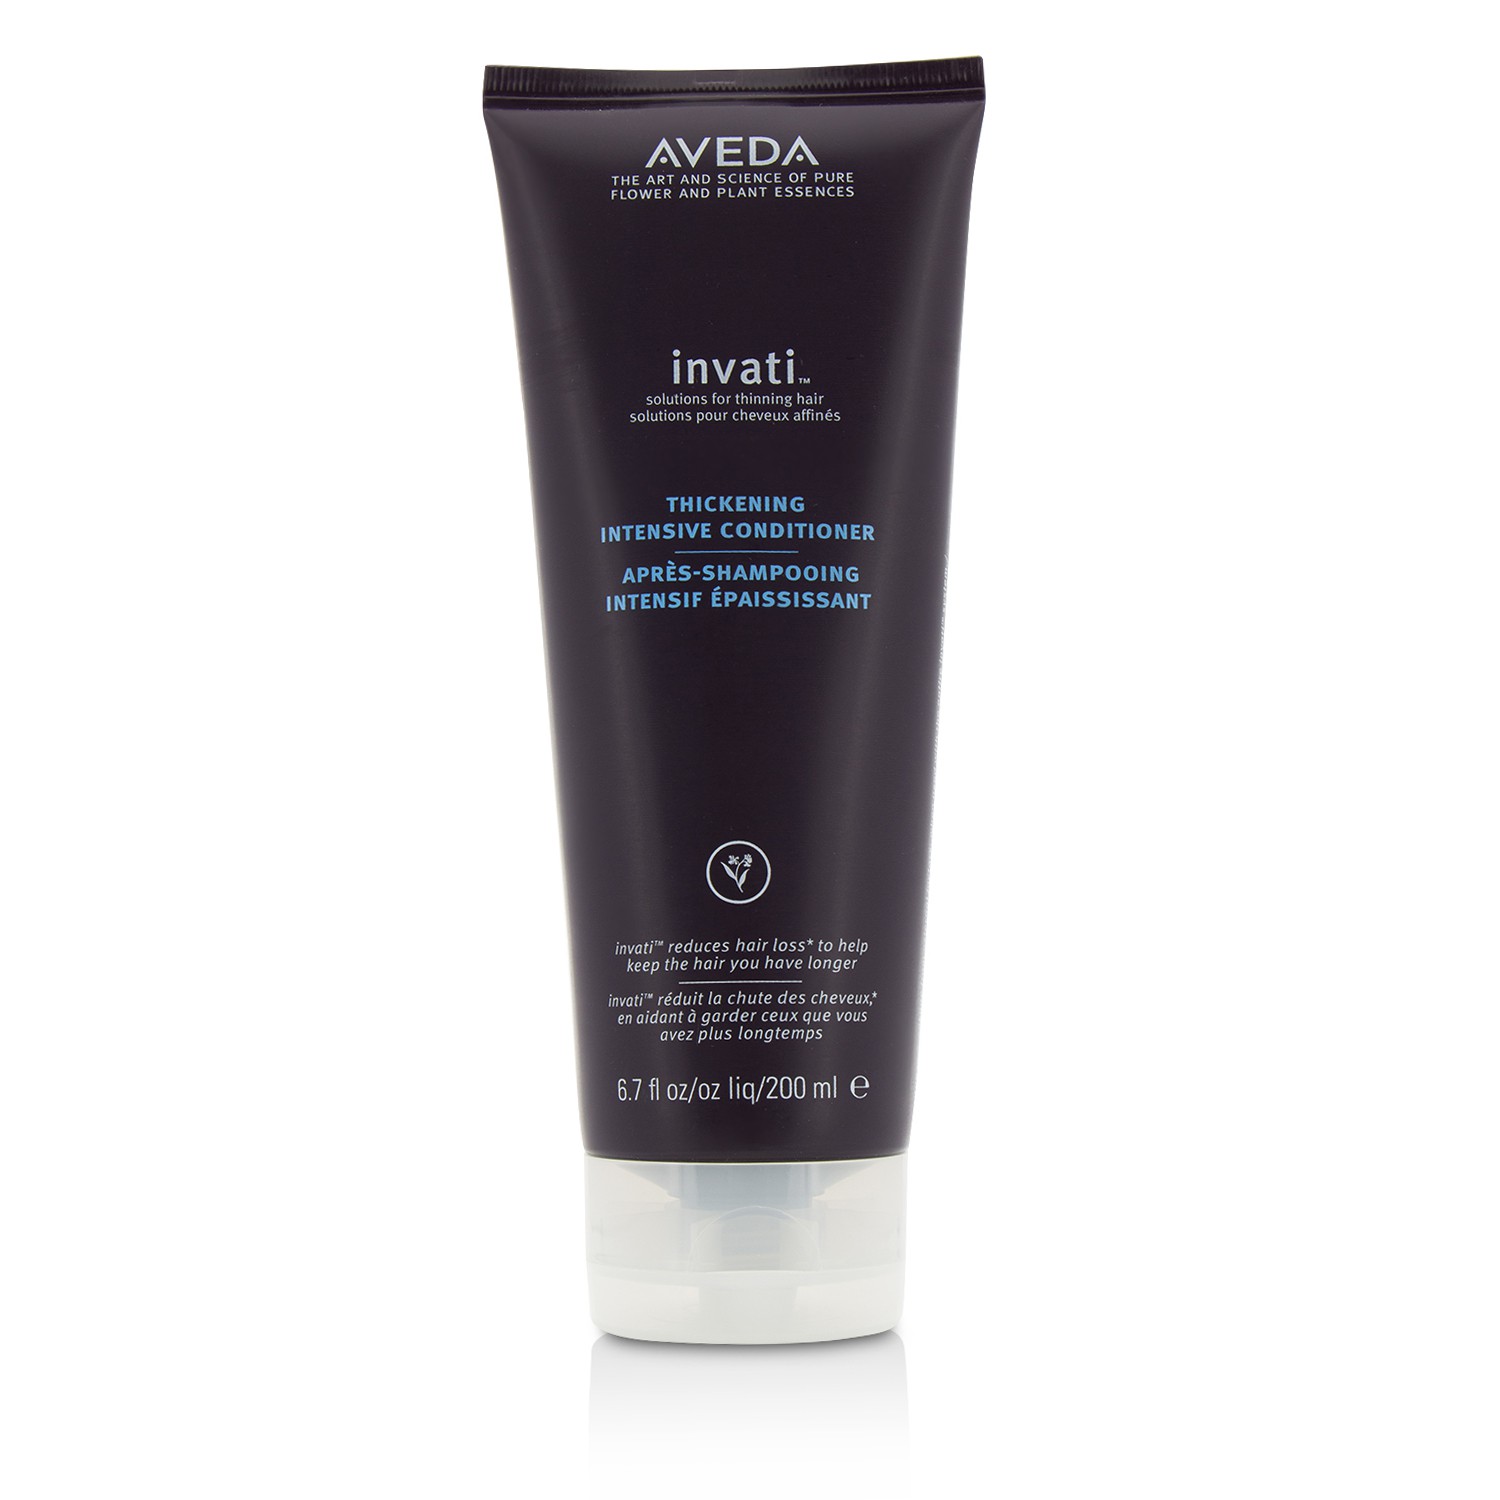 Invati Thickening Intensive Conditioner (For Thinning Hair) Aveda Image